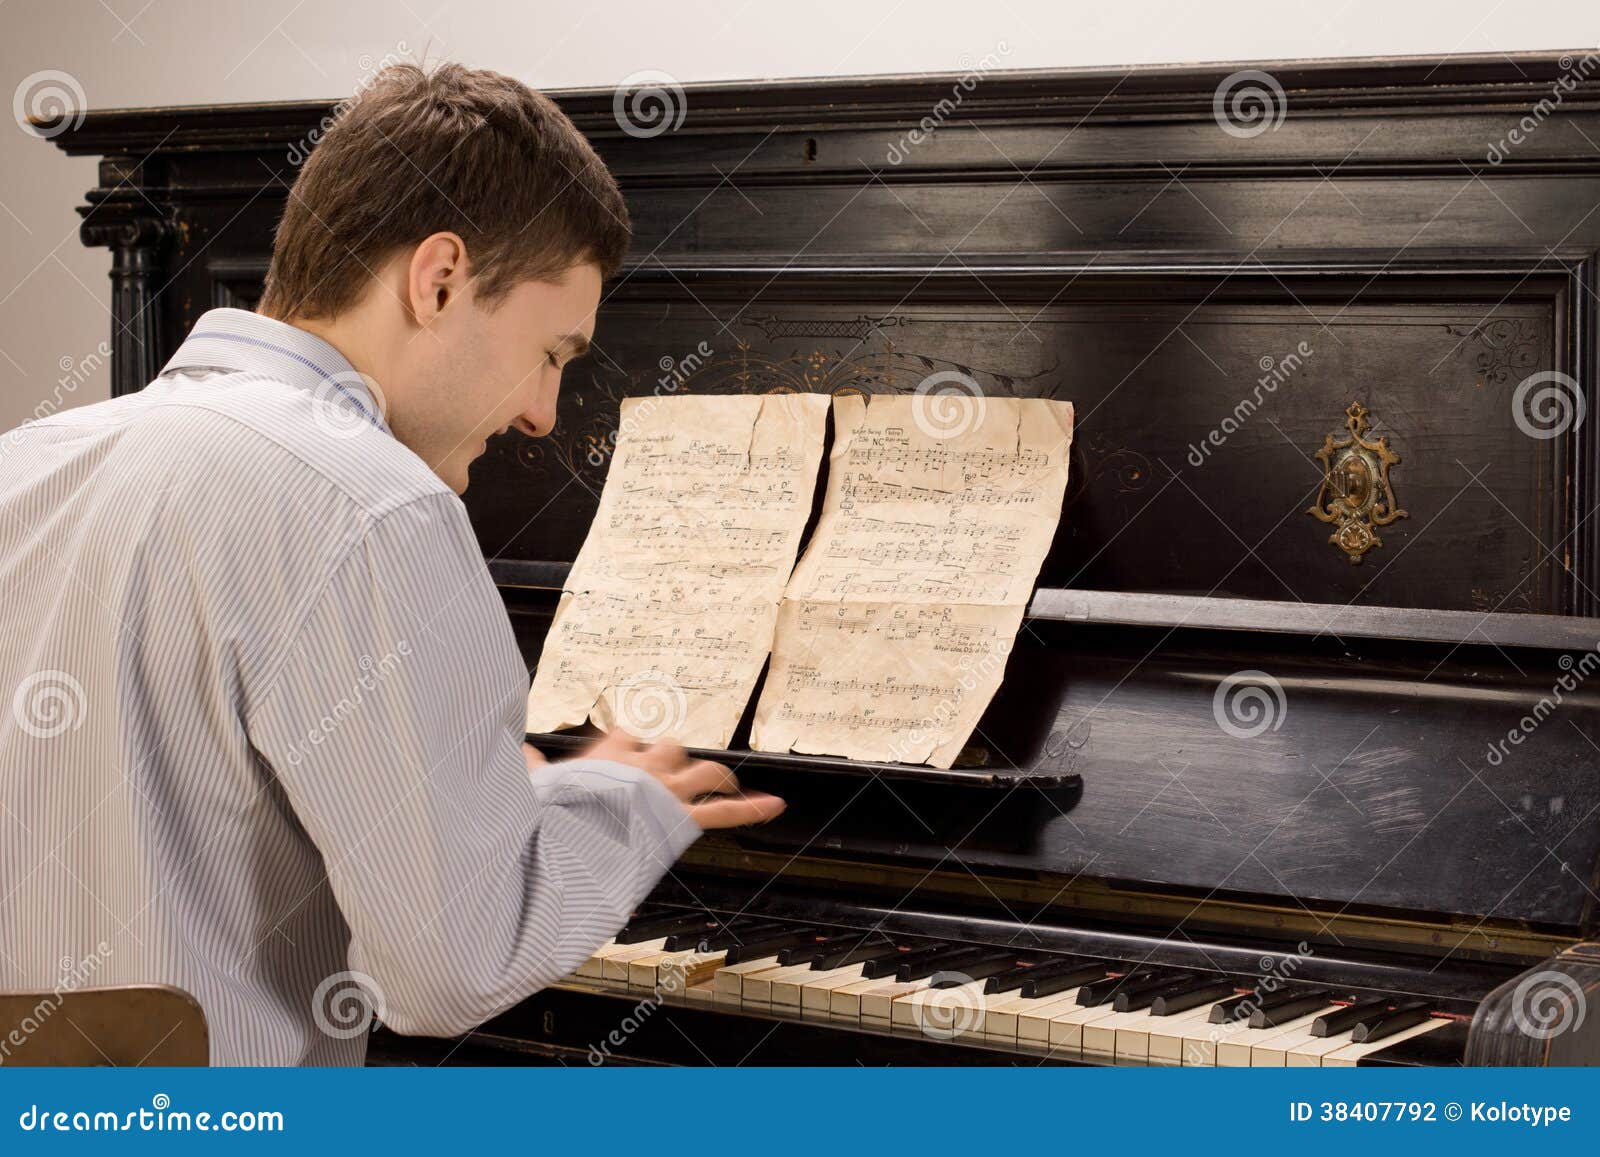 He can play piano. Young man Plays Piano. Врач играет на рояле. He can Play the Piano.